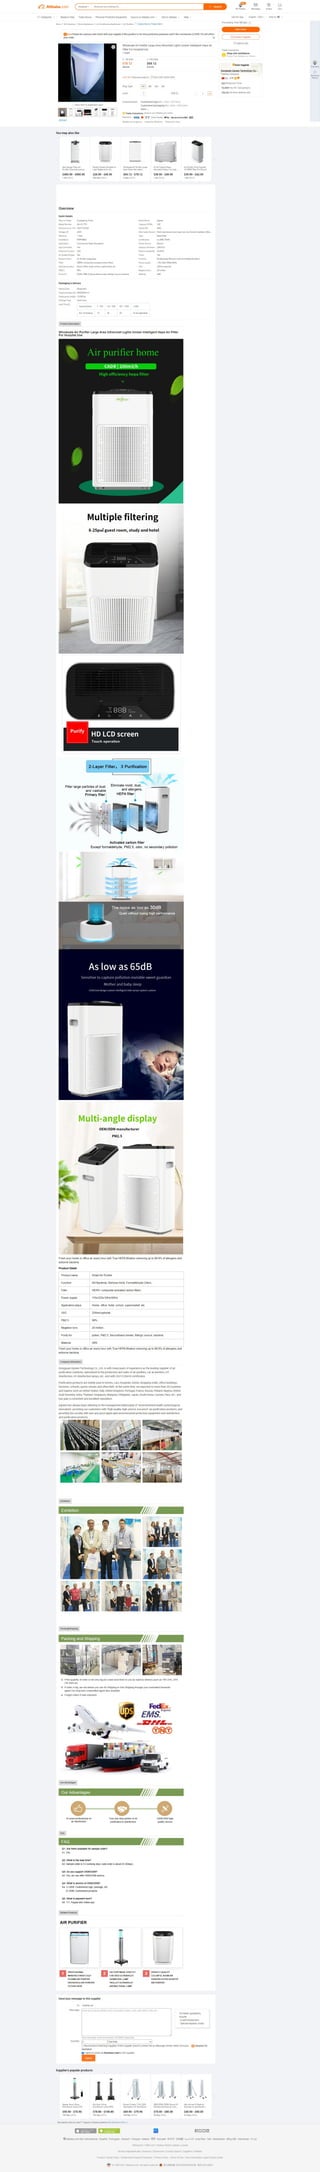 Air Purifier 2021intelligent Big Commercial Hepa 14 Uv Disinfection.pdf